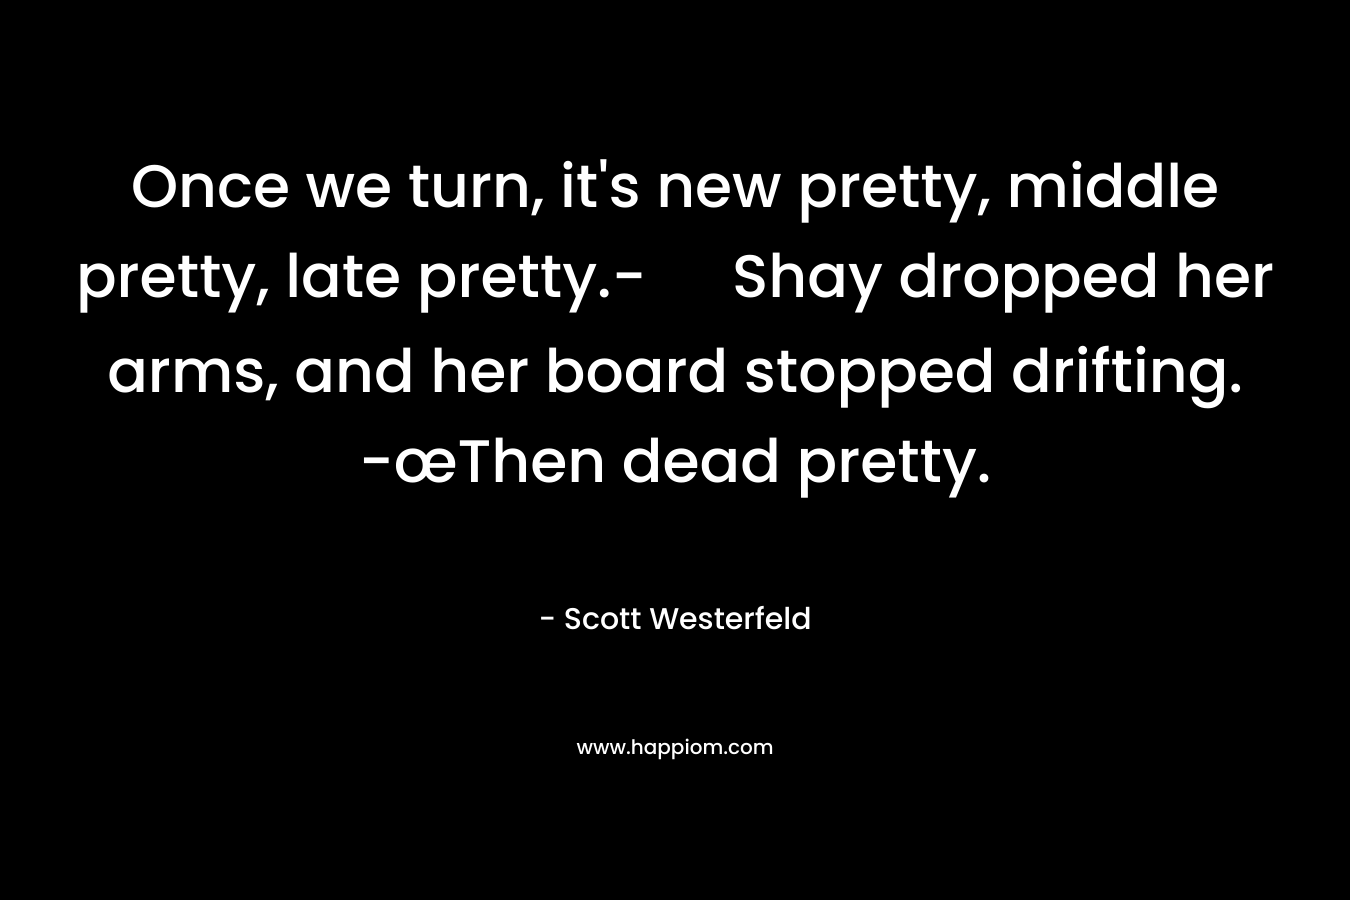 Once we turn, it’s new pretty, middle pretty, late pretty.- Shay dropped her arms, and her board stopped drifting. -œThen dead pretty. – Scott Westerfeld